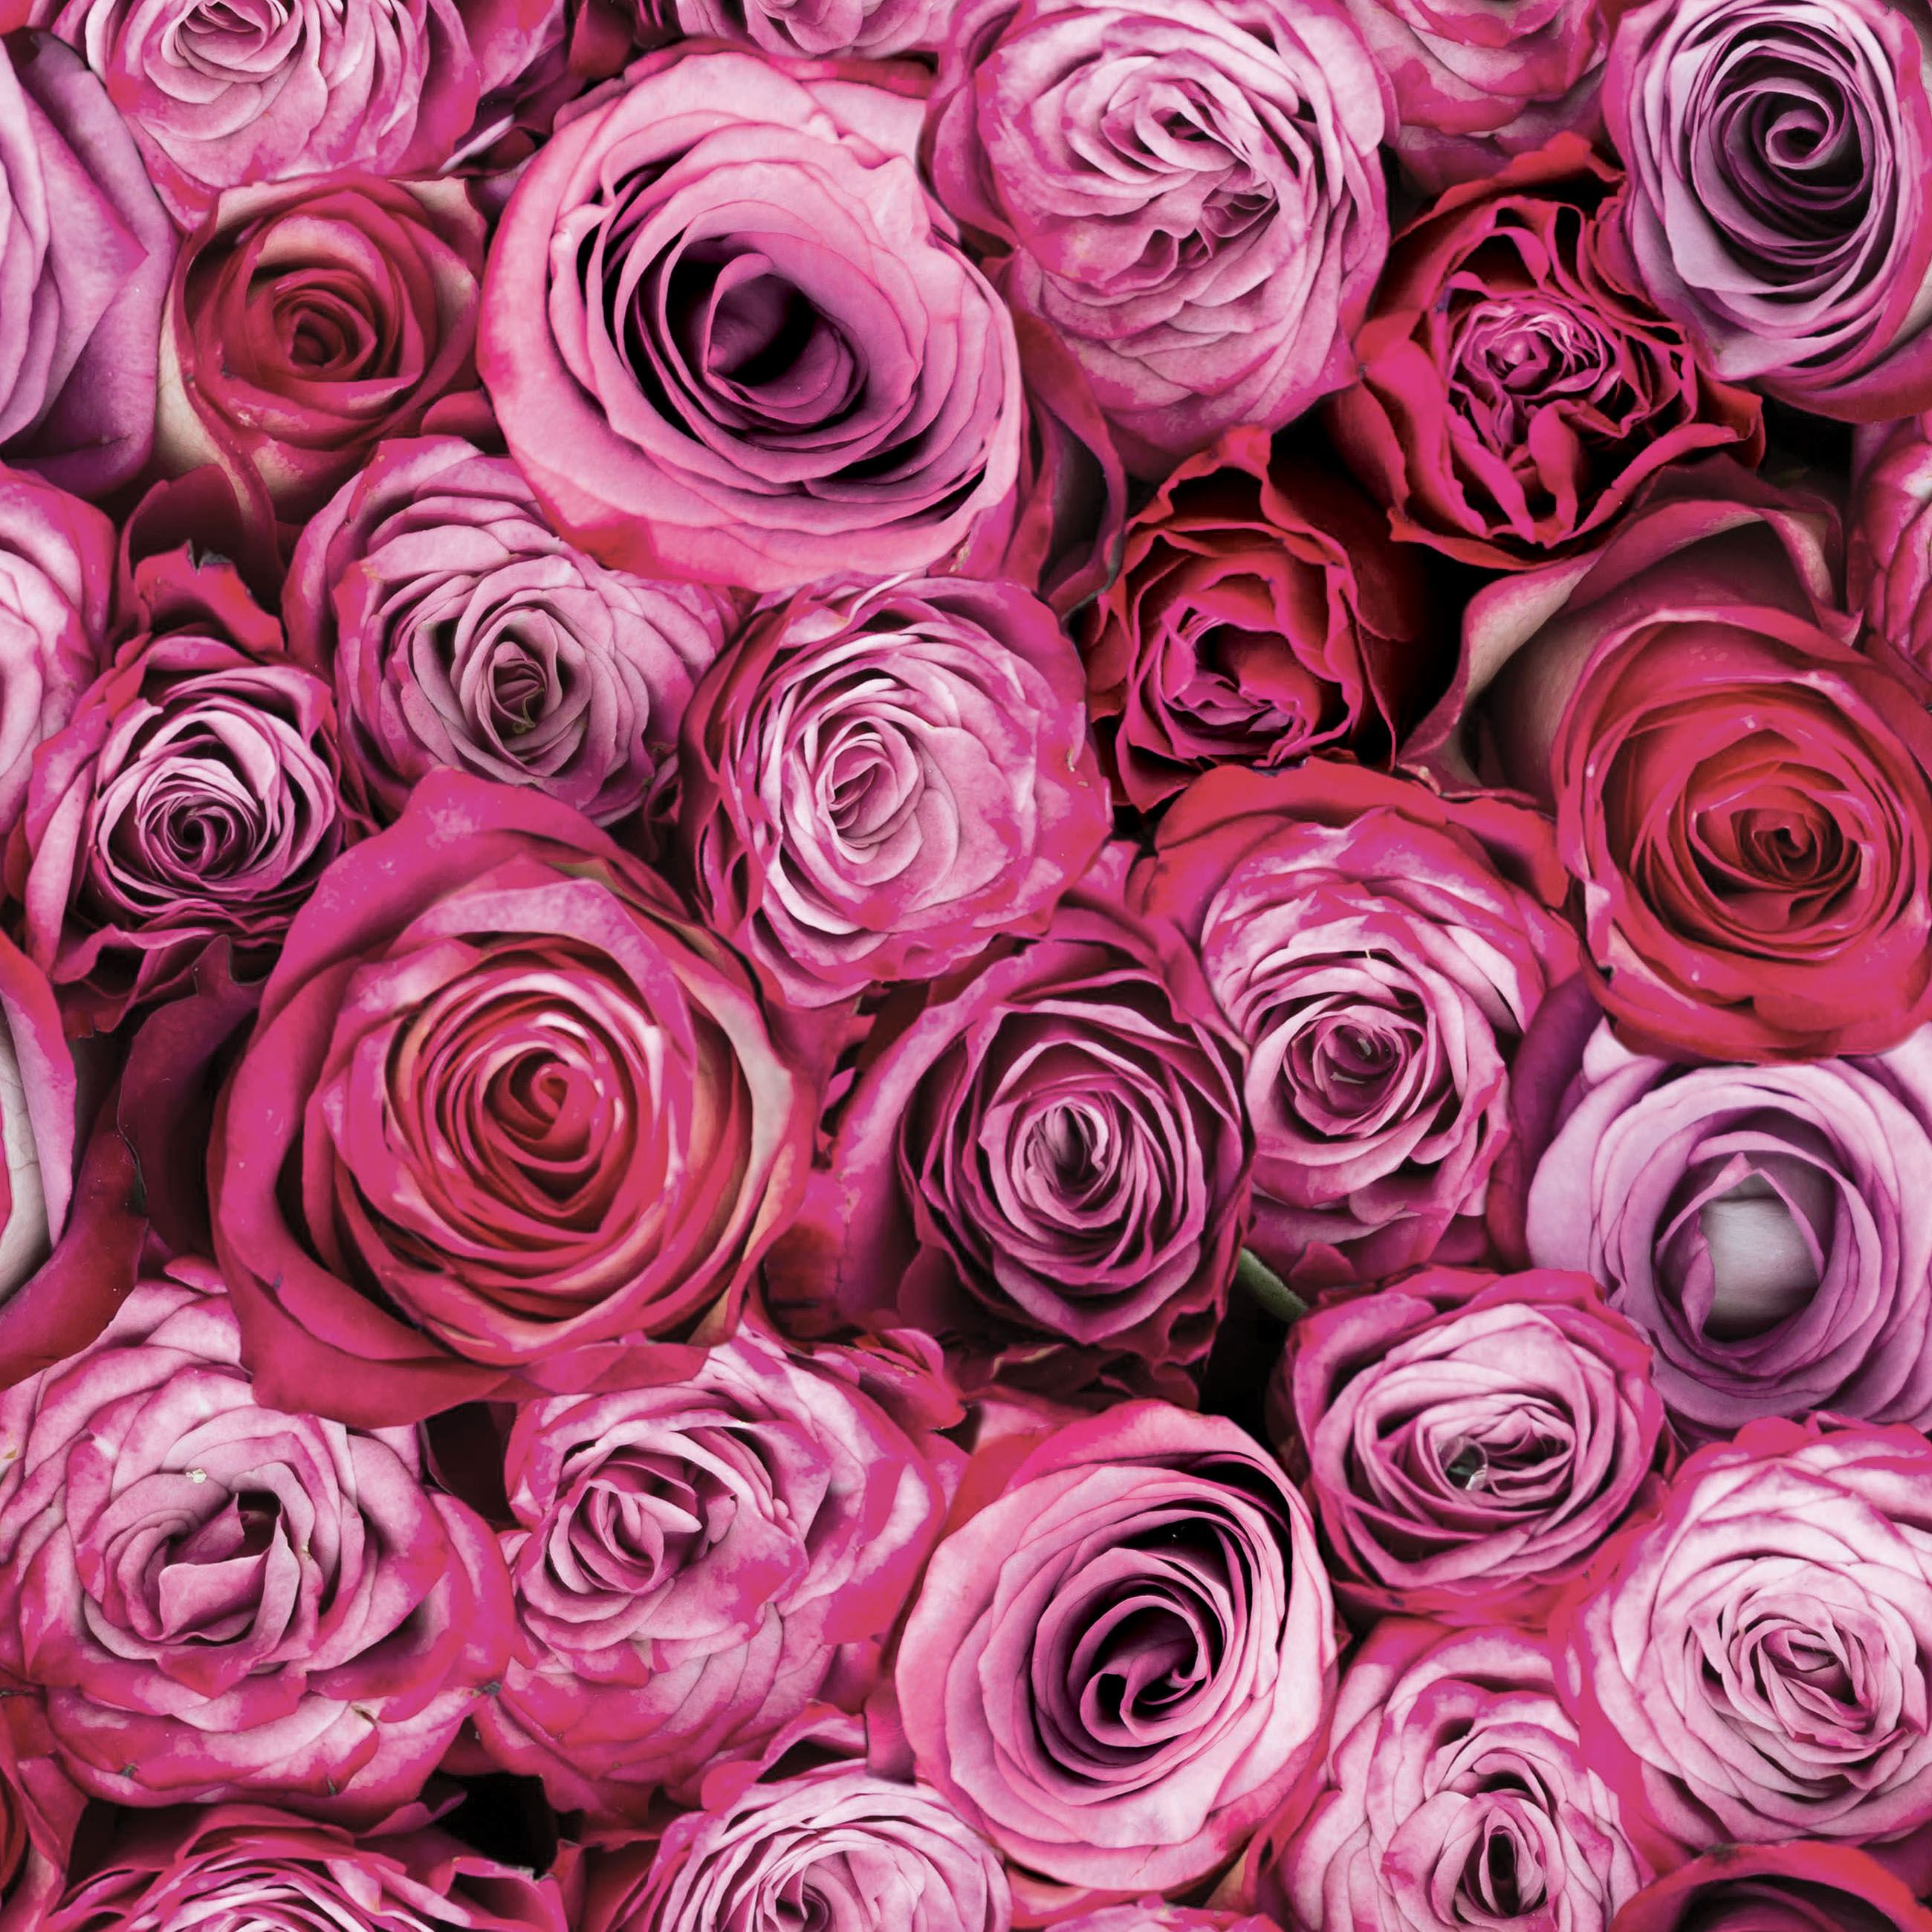 B And Q Rose , HD Wallpaper & Backgrounds